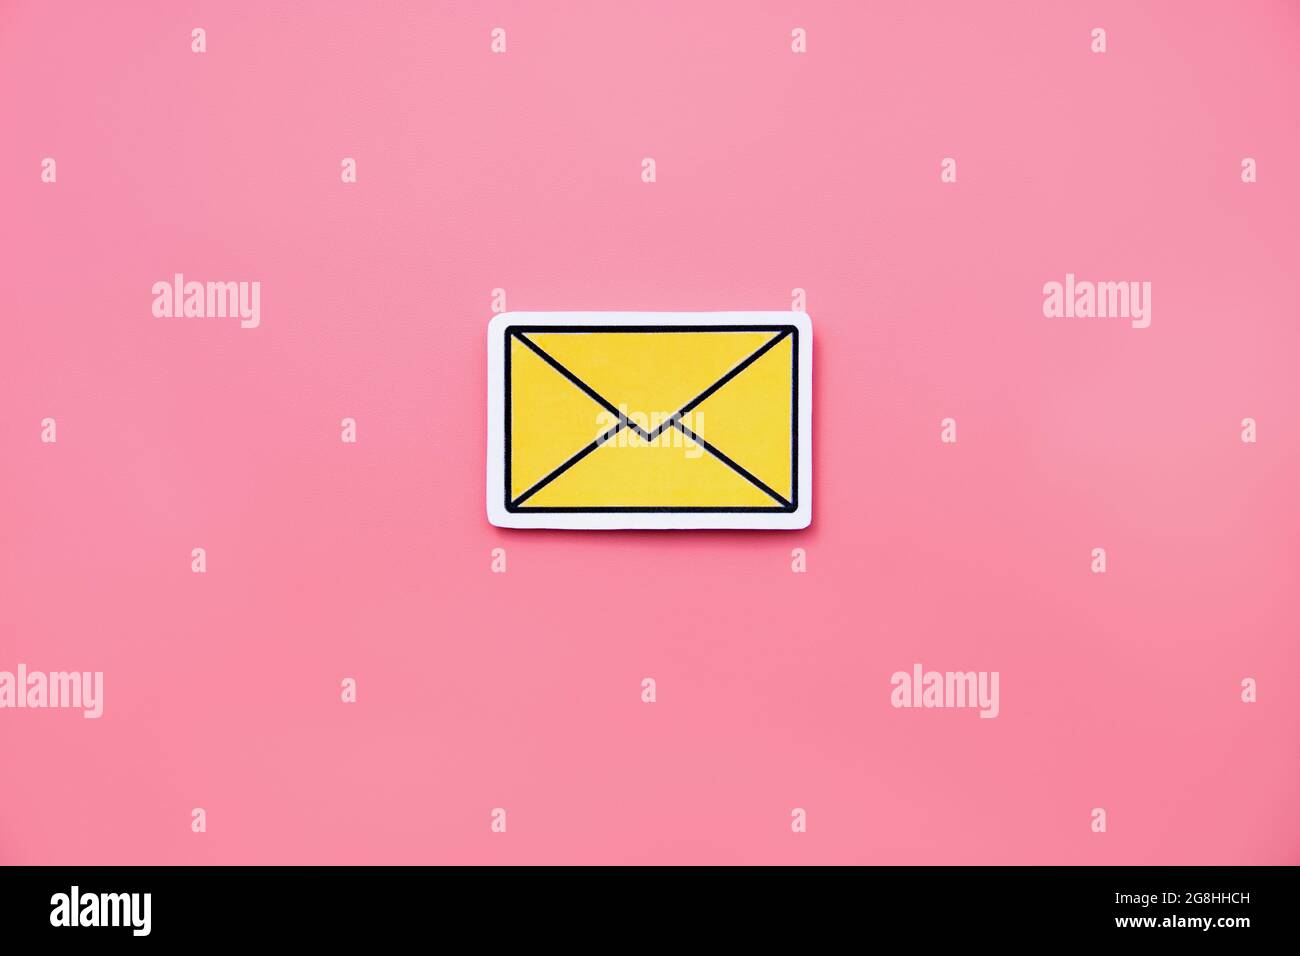 Yellow message sign or envelope icon against a pink background Stock Photo